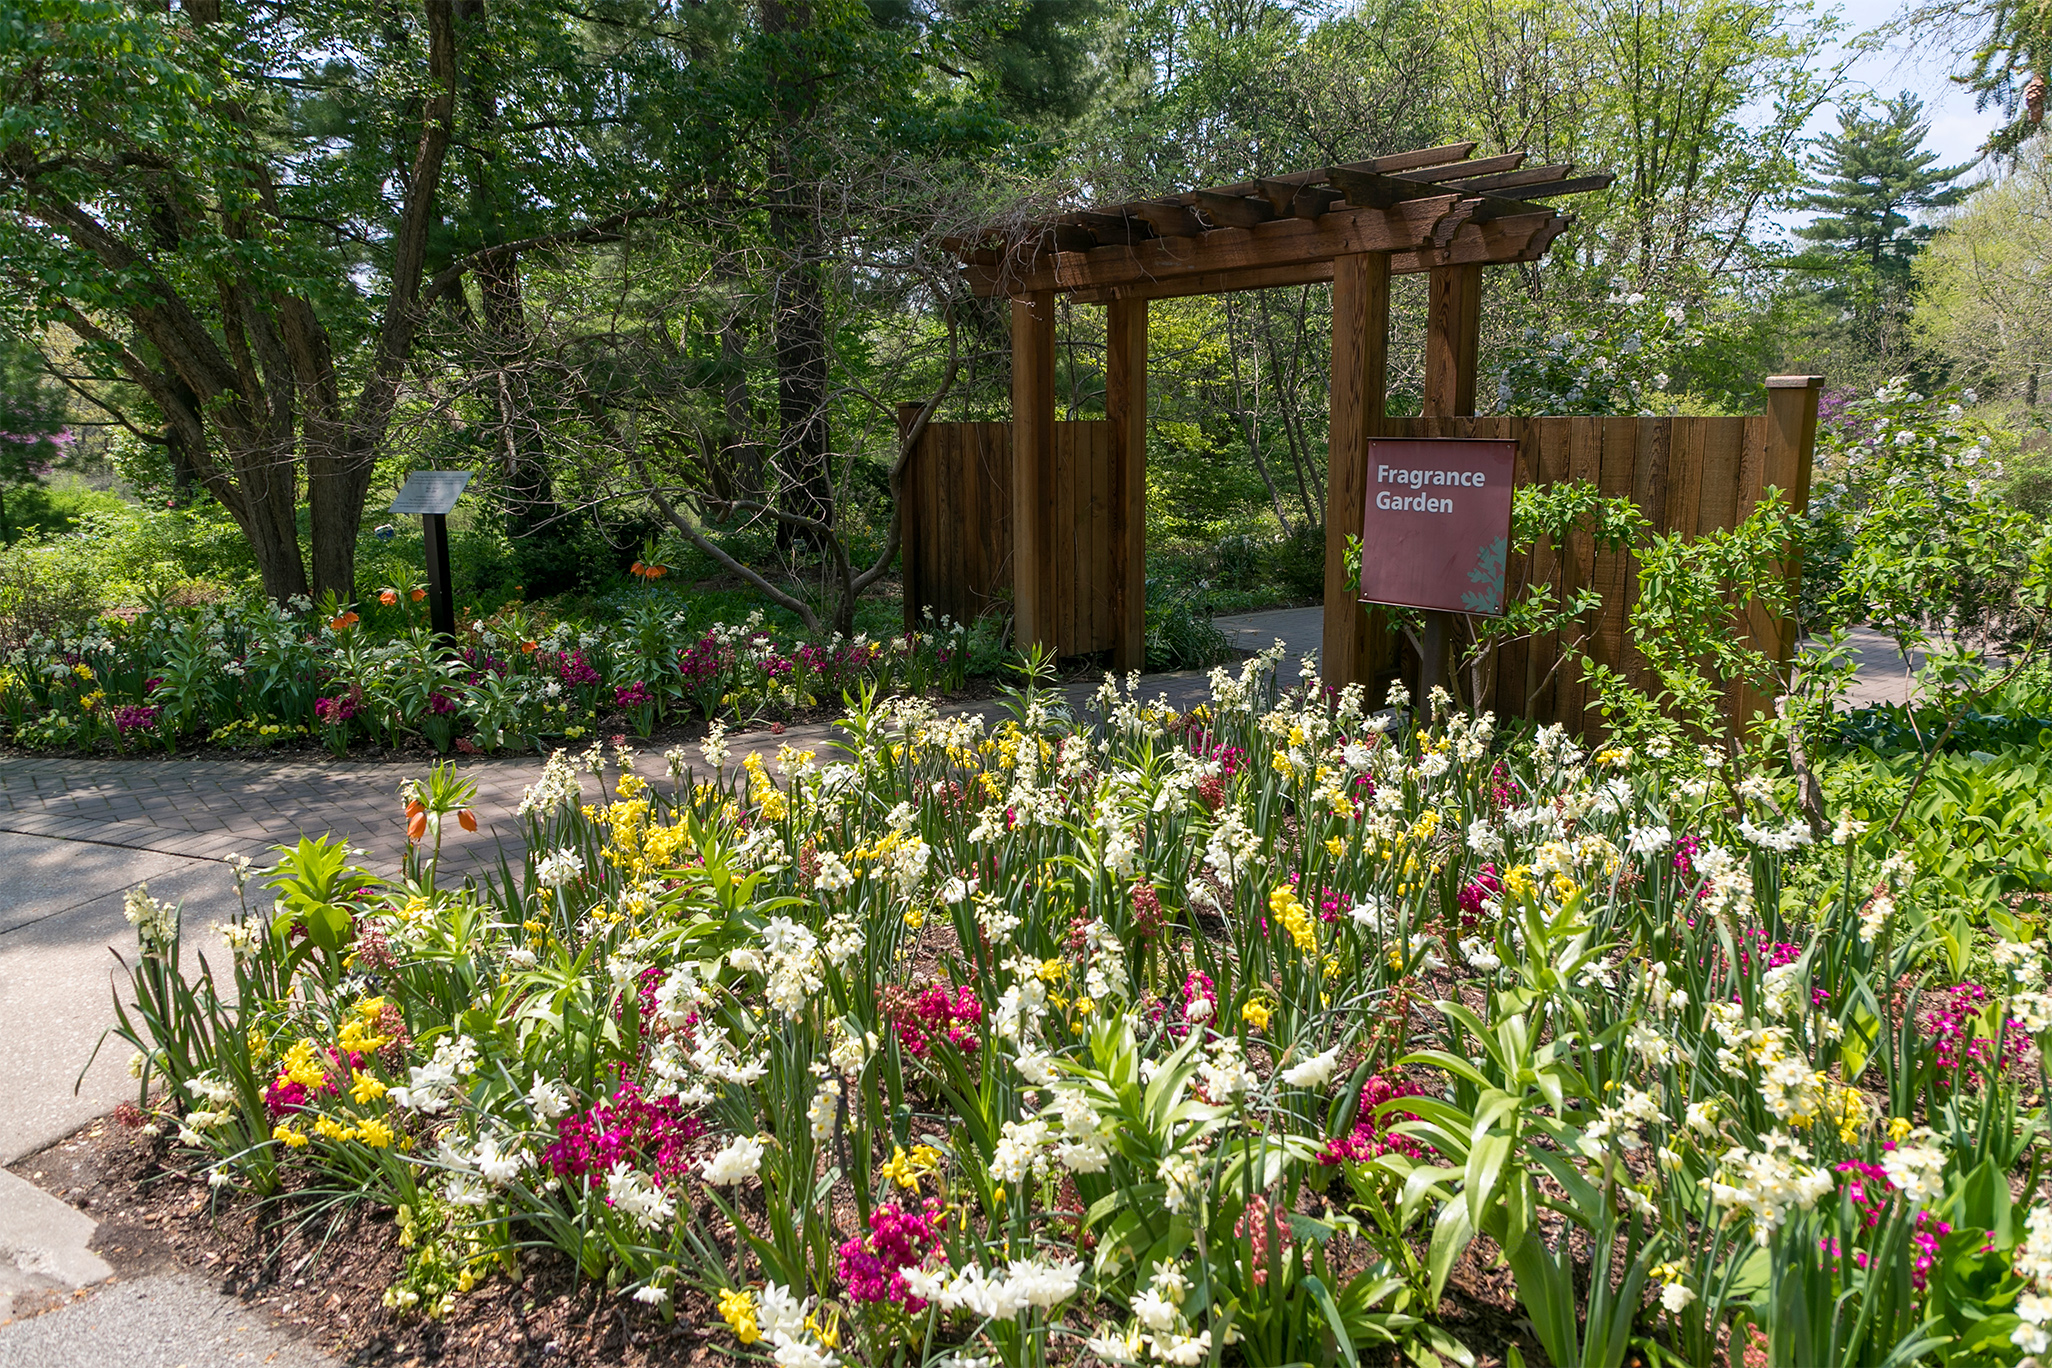 Entrance to the Fragrance Garden on the west side, framed by blooming spring perennials.